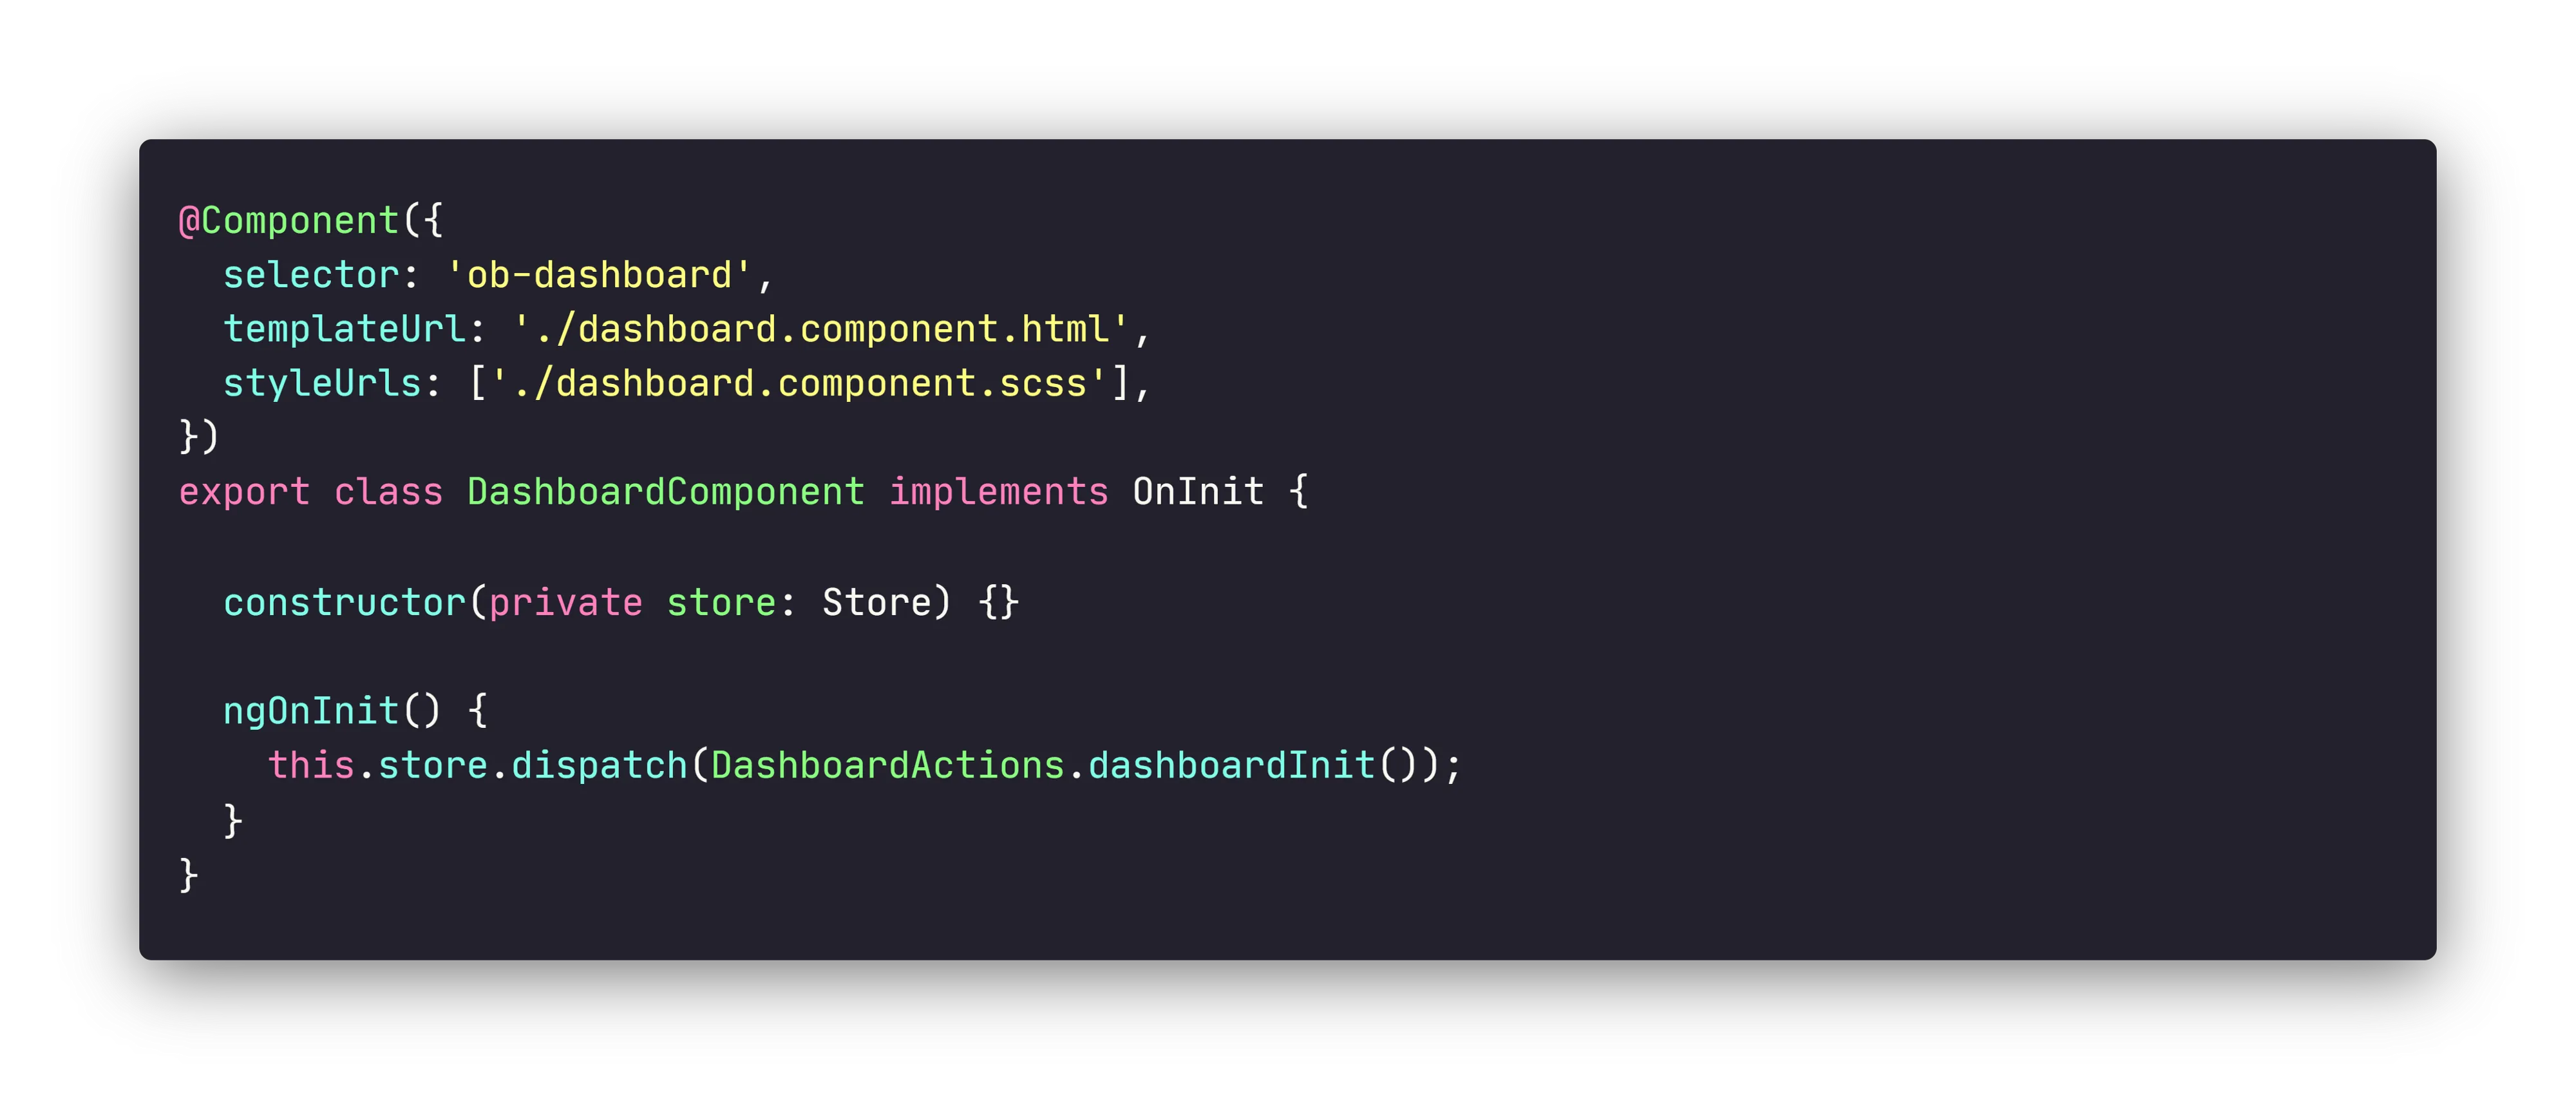 Logic-less component, a common positive occurrence in NgRx codebases, don’t forget that the components are the hardest and slowest to test!